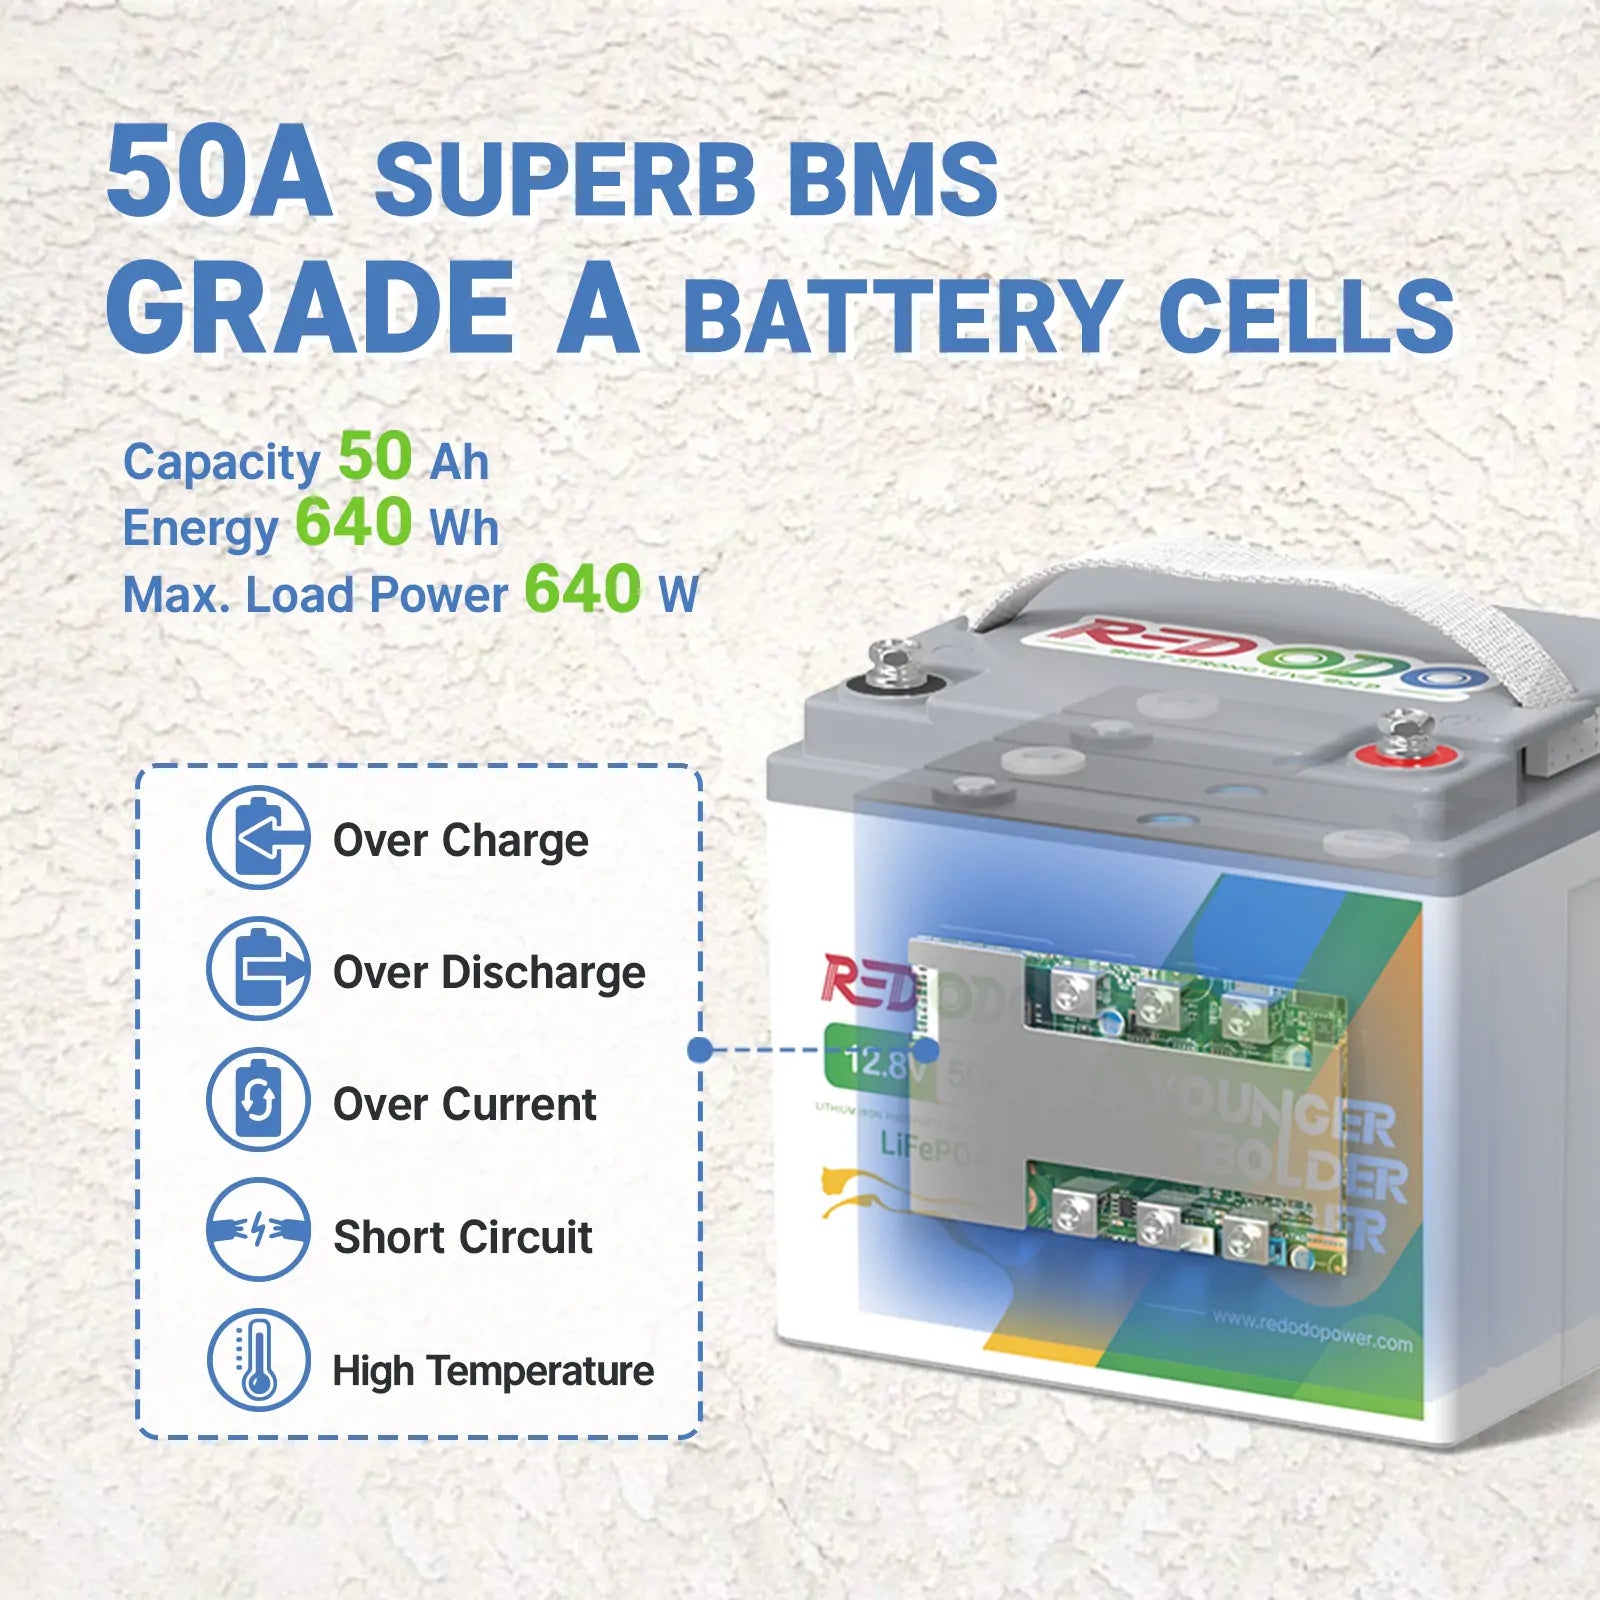 【Only $152】Redodo 12V 50Ah Pro LiFePO4 Battery | 640Wh & 640W